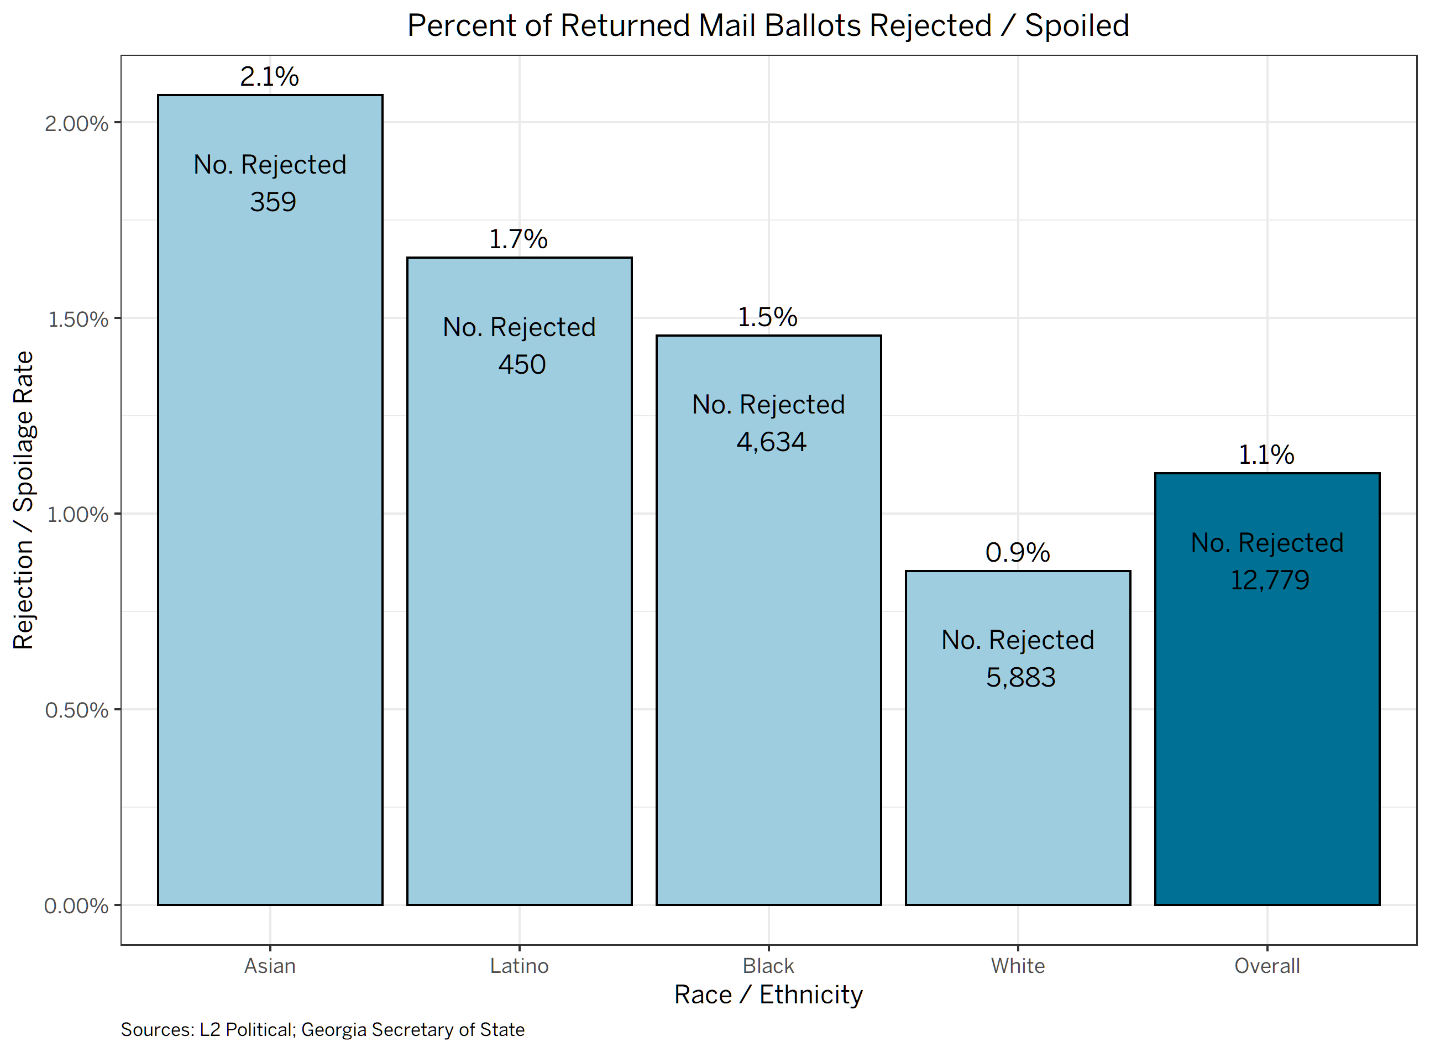 Percent of Returned Mail Ballots Rejected/Spoiled